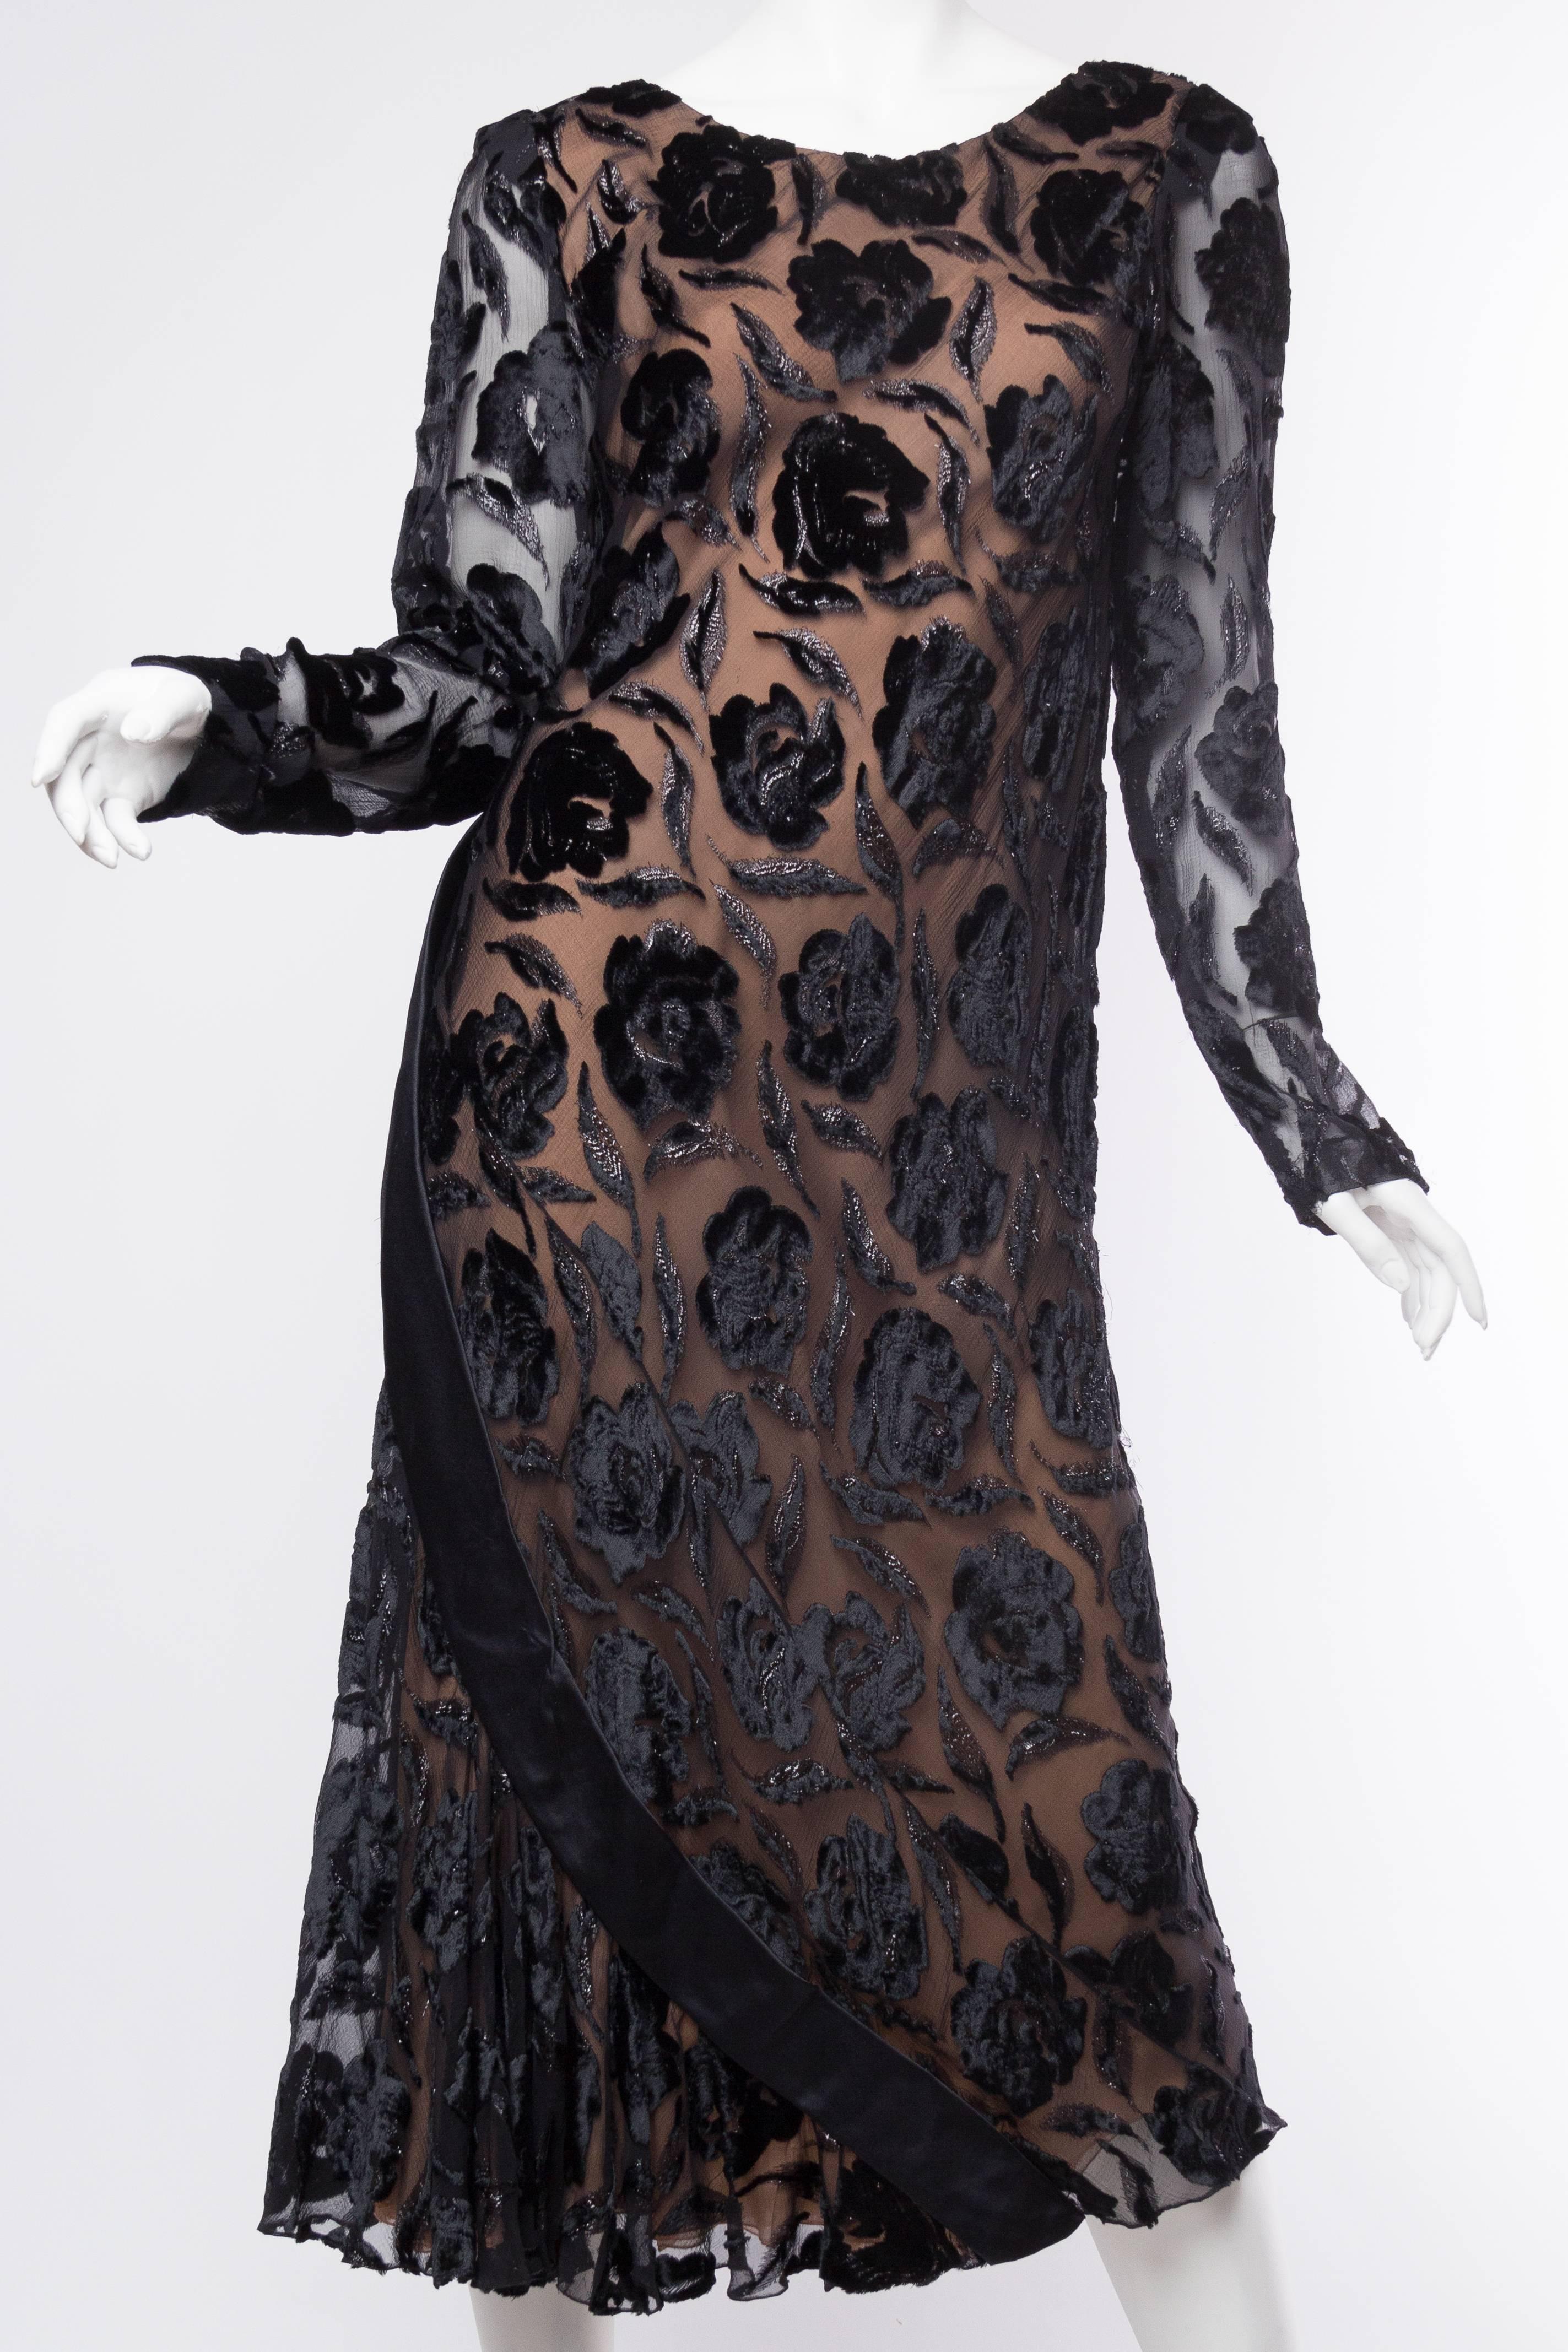 Dress is bias cut and therefore will accommodate several sizes, measurements are measured at the smallest. Beautiful Couture hand finishing throughout. 1970S STAVROPOULOS Black Bias Cut Silk Lurex Burnout Velvet Cocktail Dress With Sleeves 